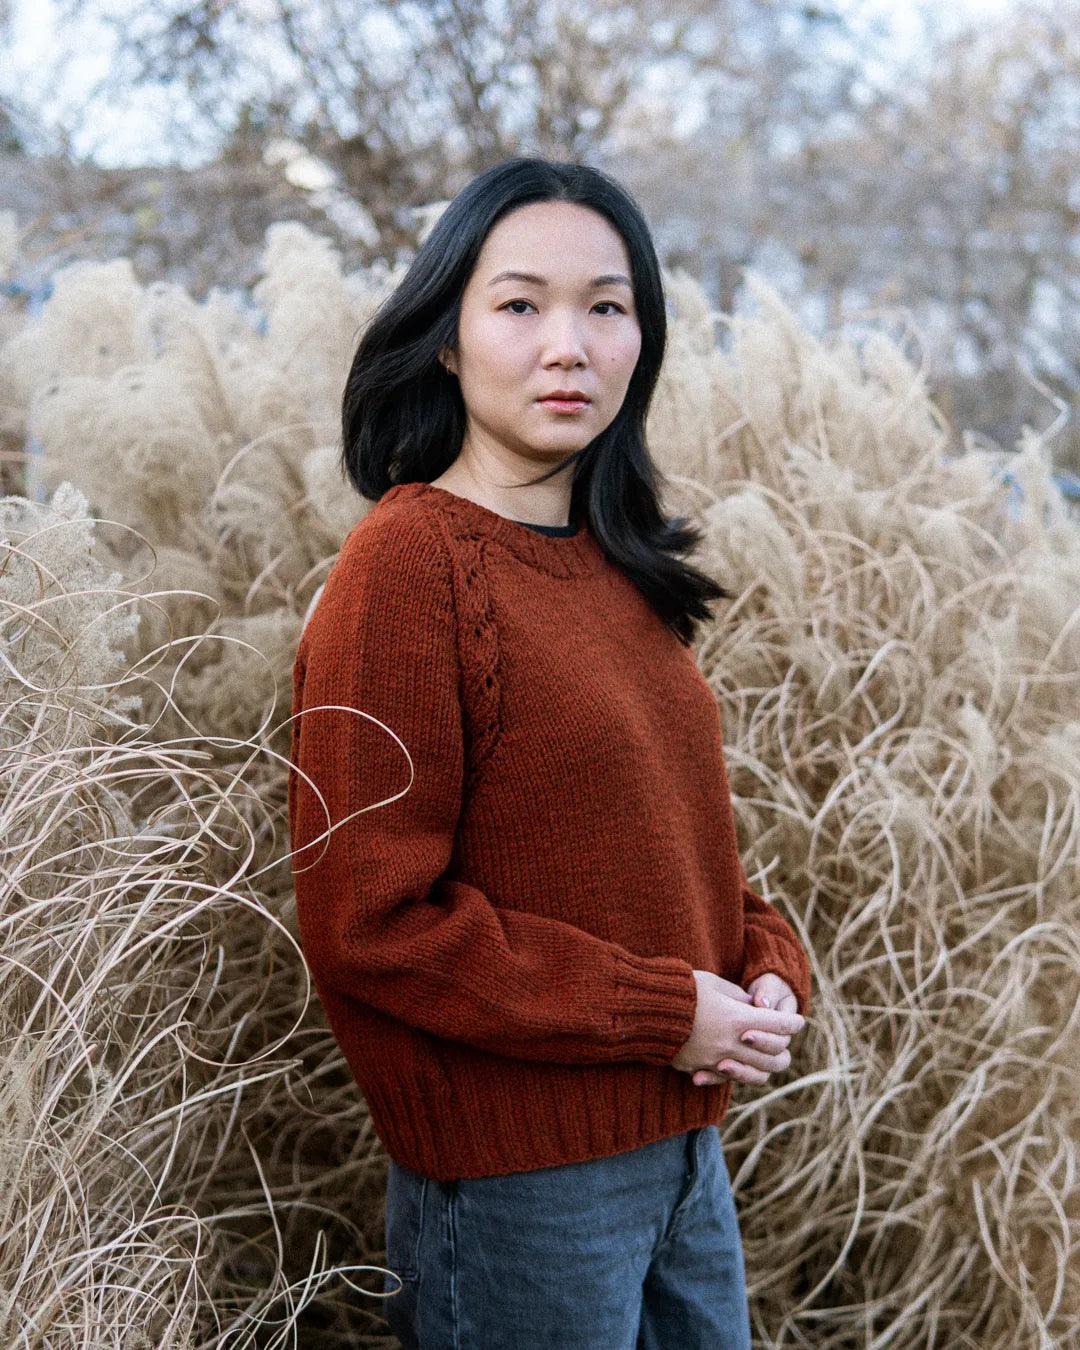 Weekday Dress + Pullover - Knitting Pattern (PDF) - Aimee Sher Makes